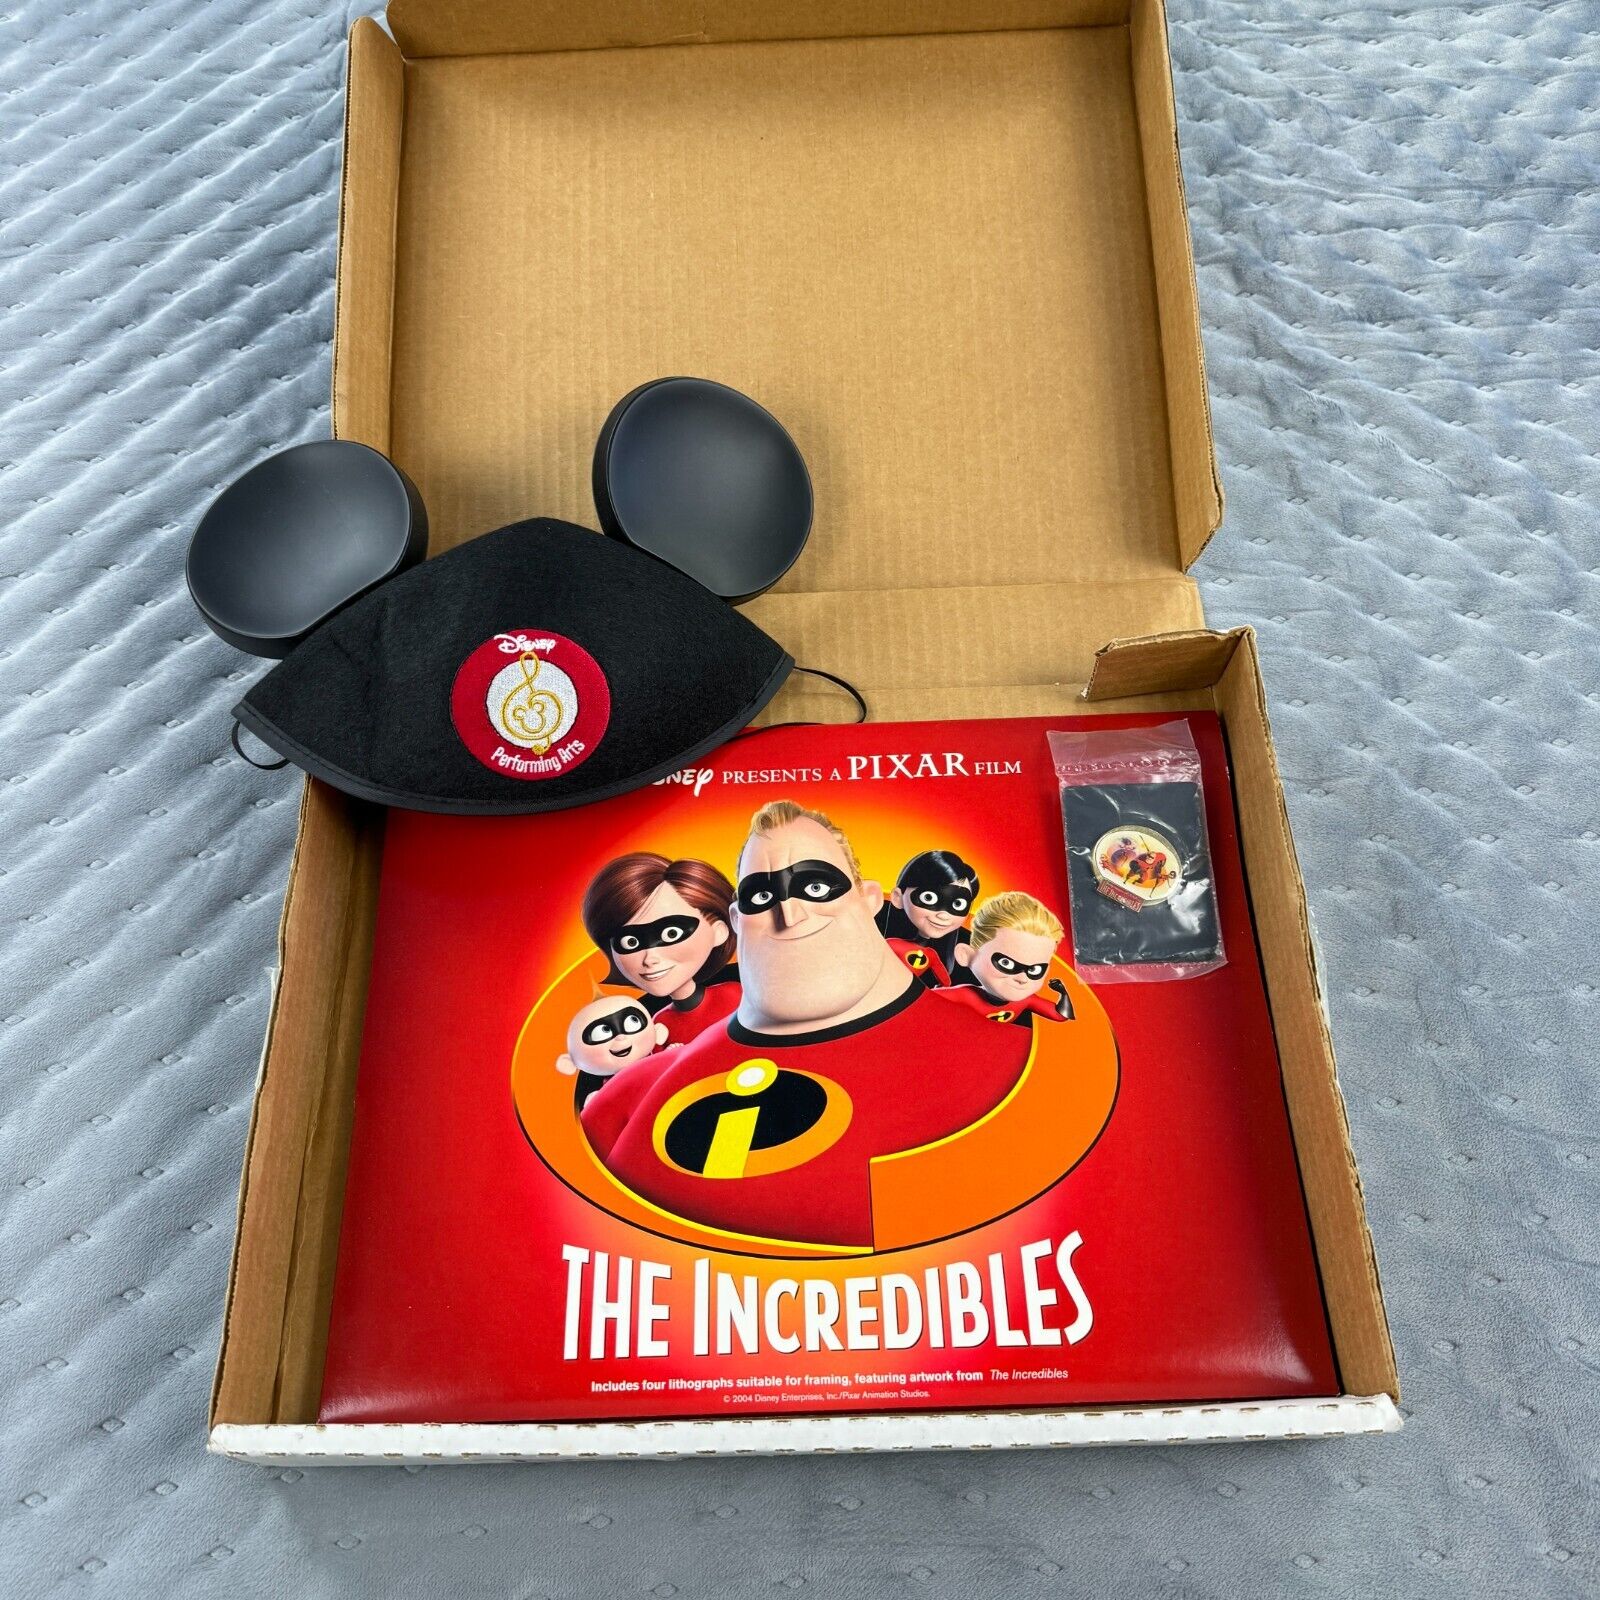 VINTAGE Pixar The Incredibles Lithographs Micky Mouse Ears Pins 2004 Artwork Y2K